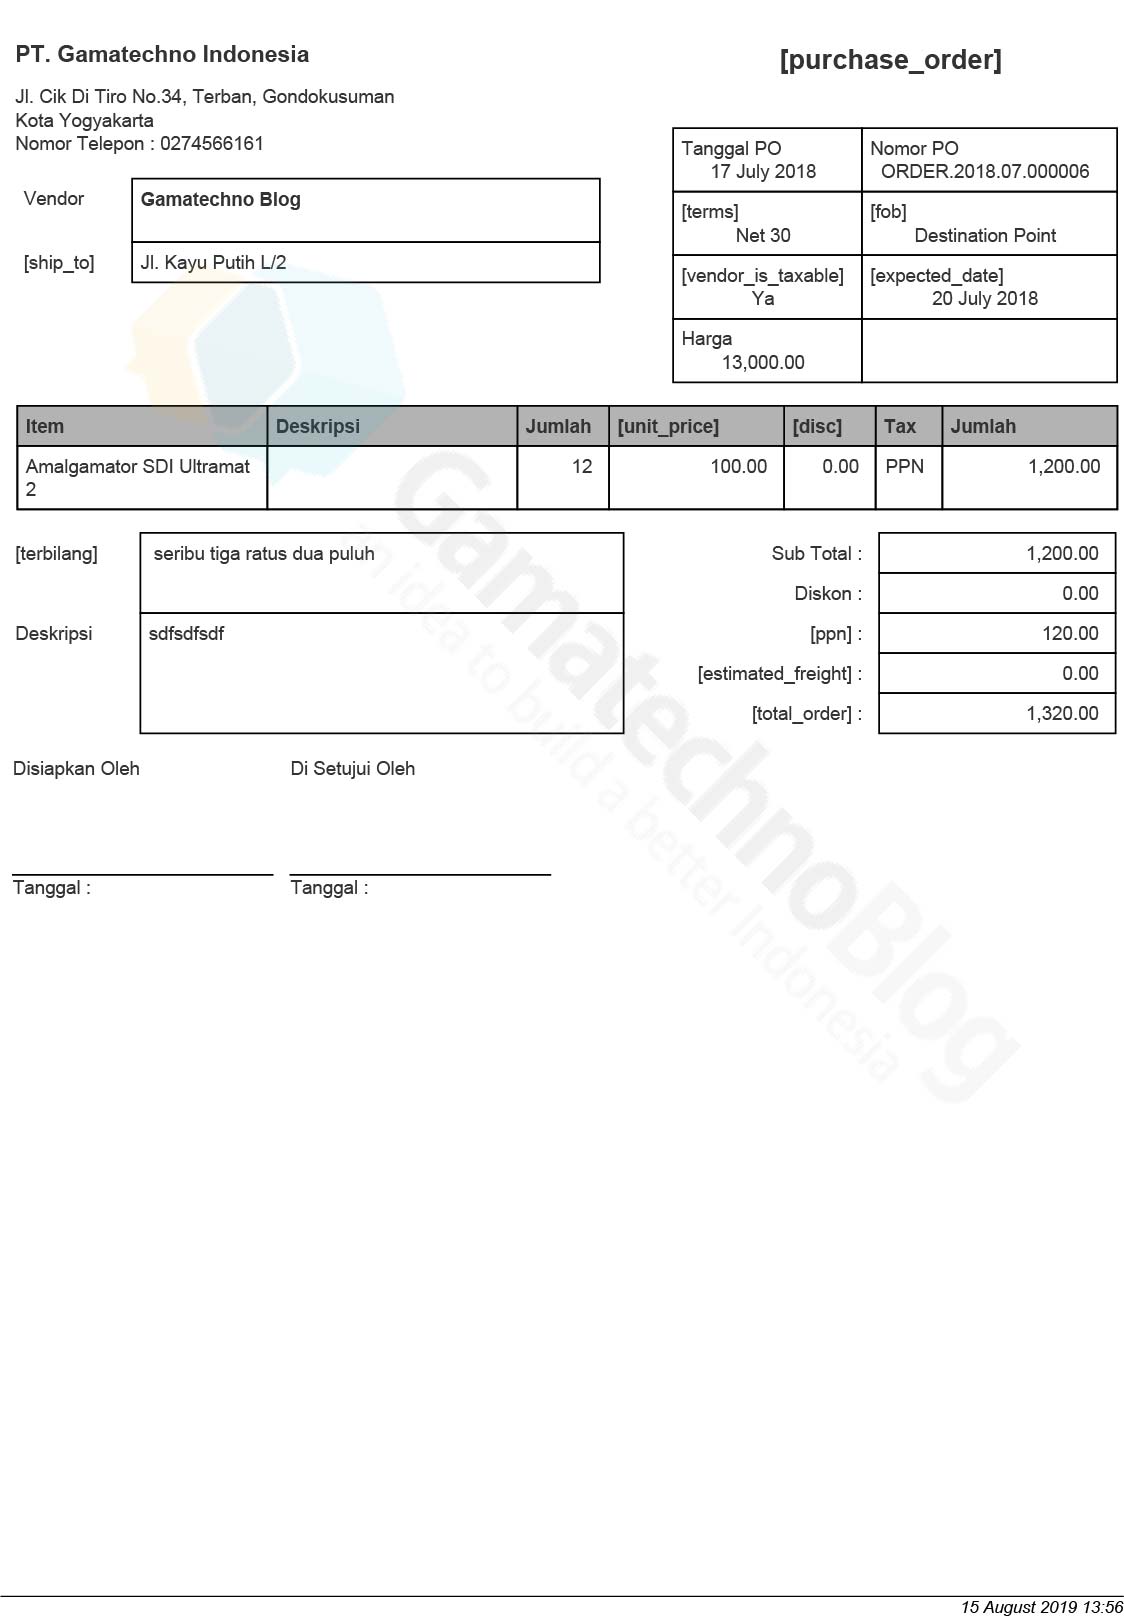 Detail Contoh Purchase Requisition Nomer 16